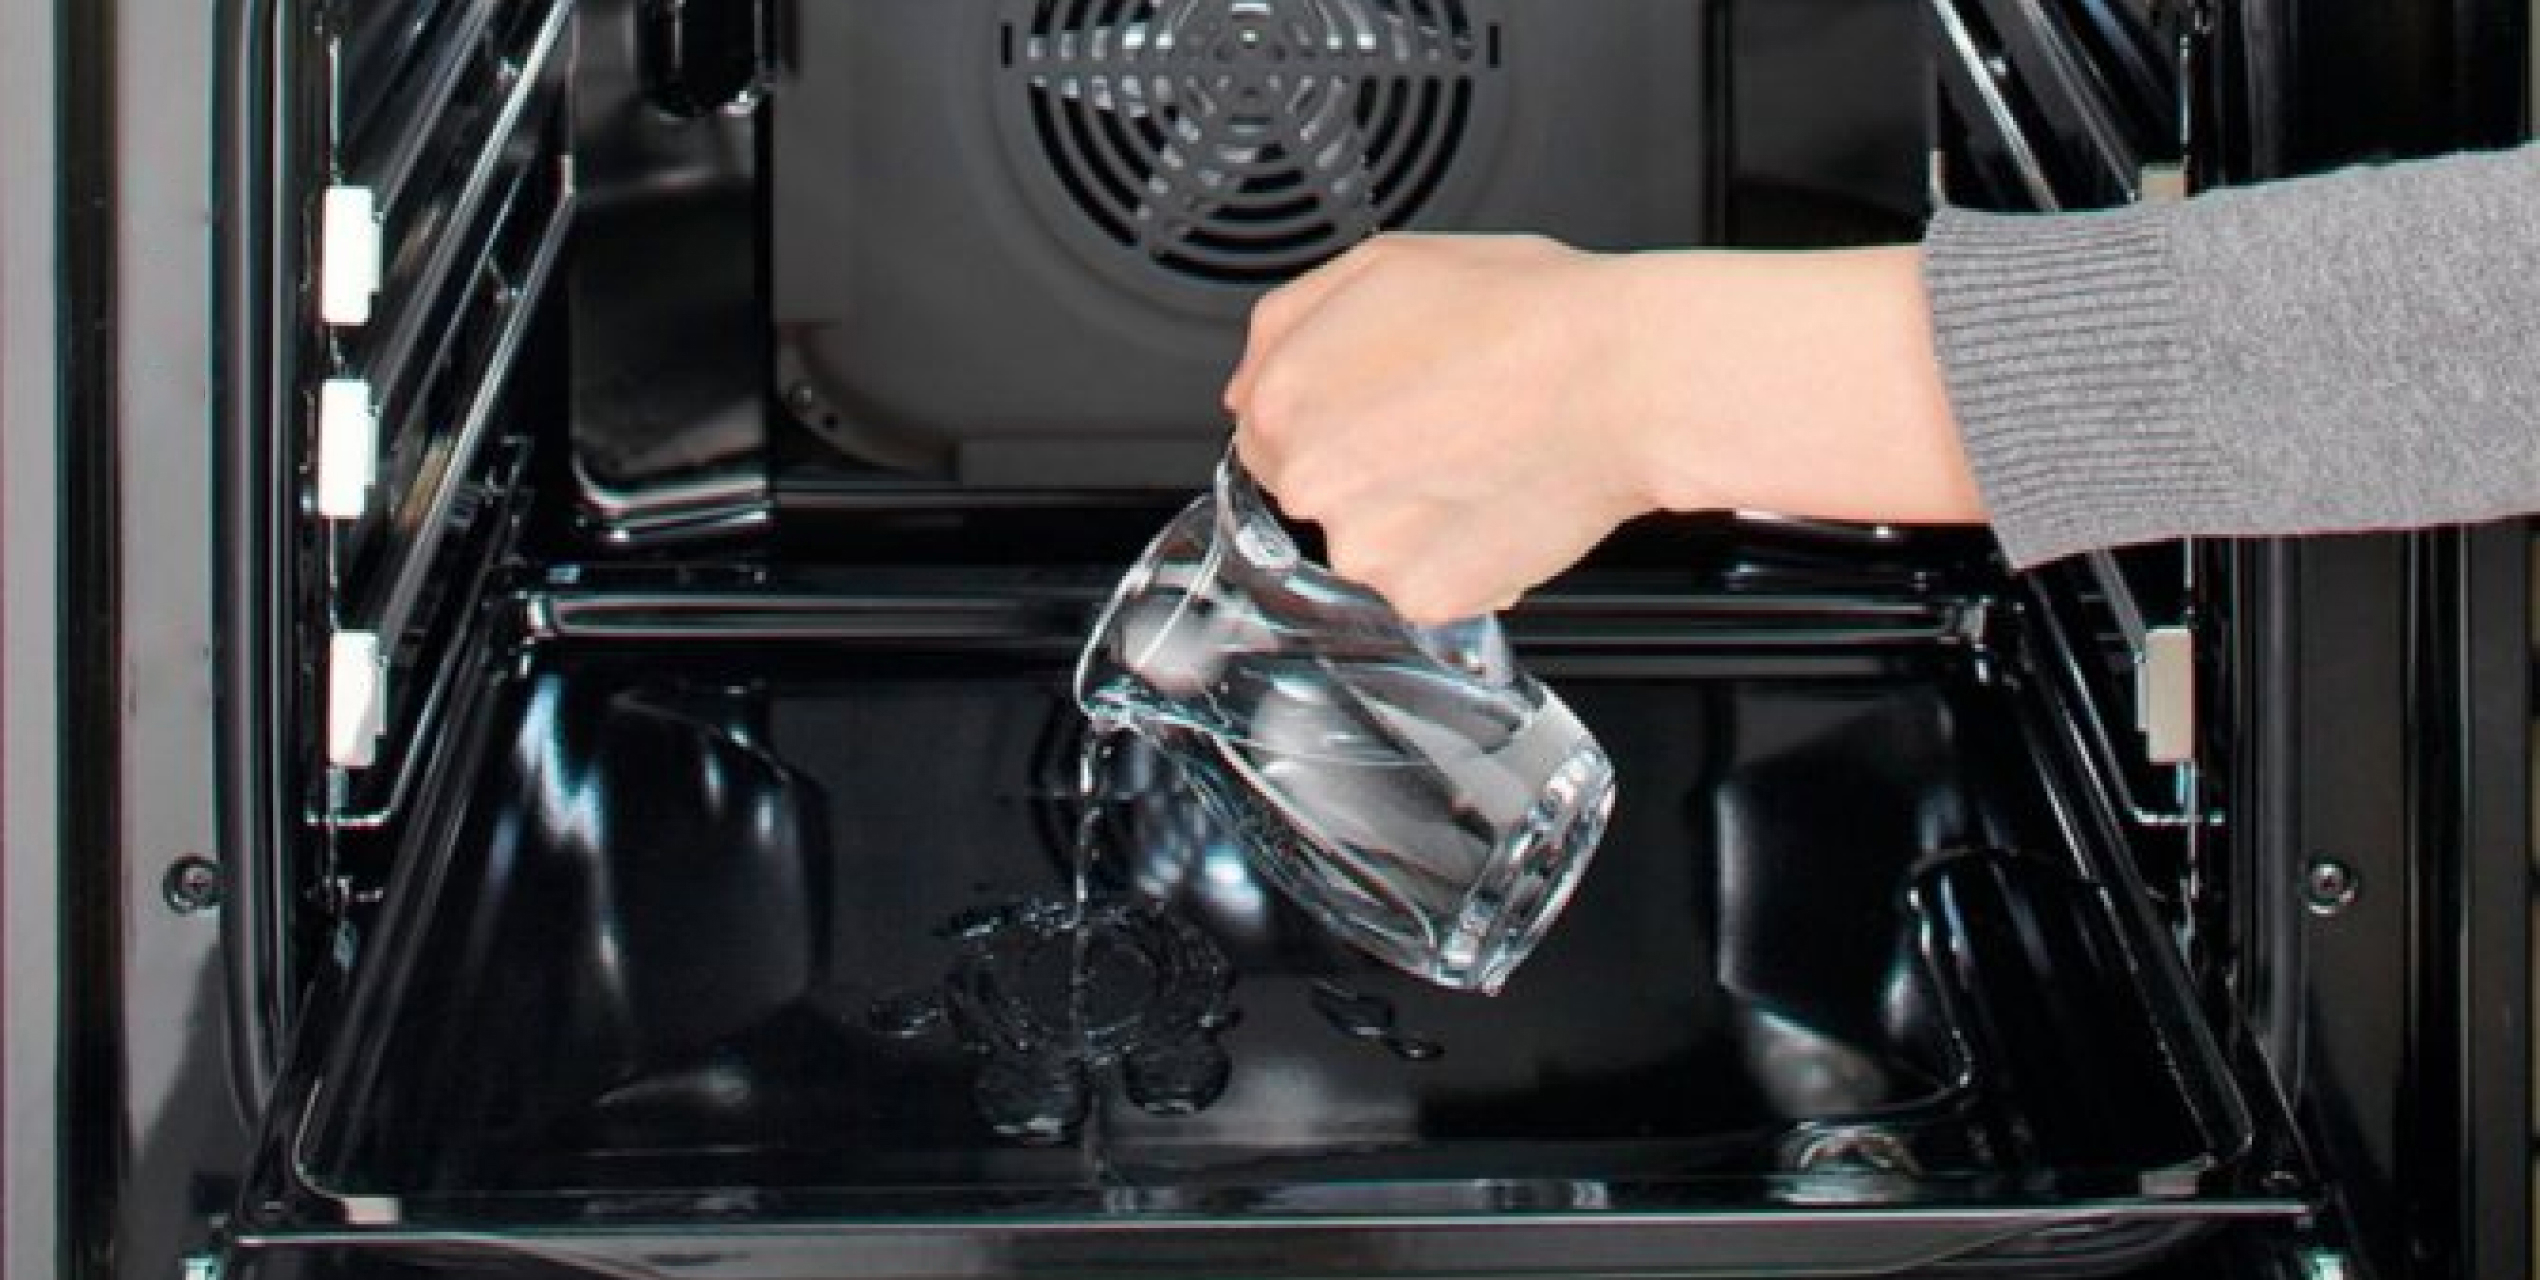 How to clean oven with steam